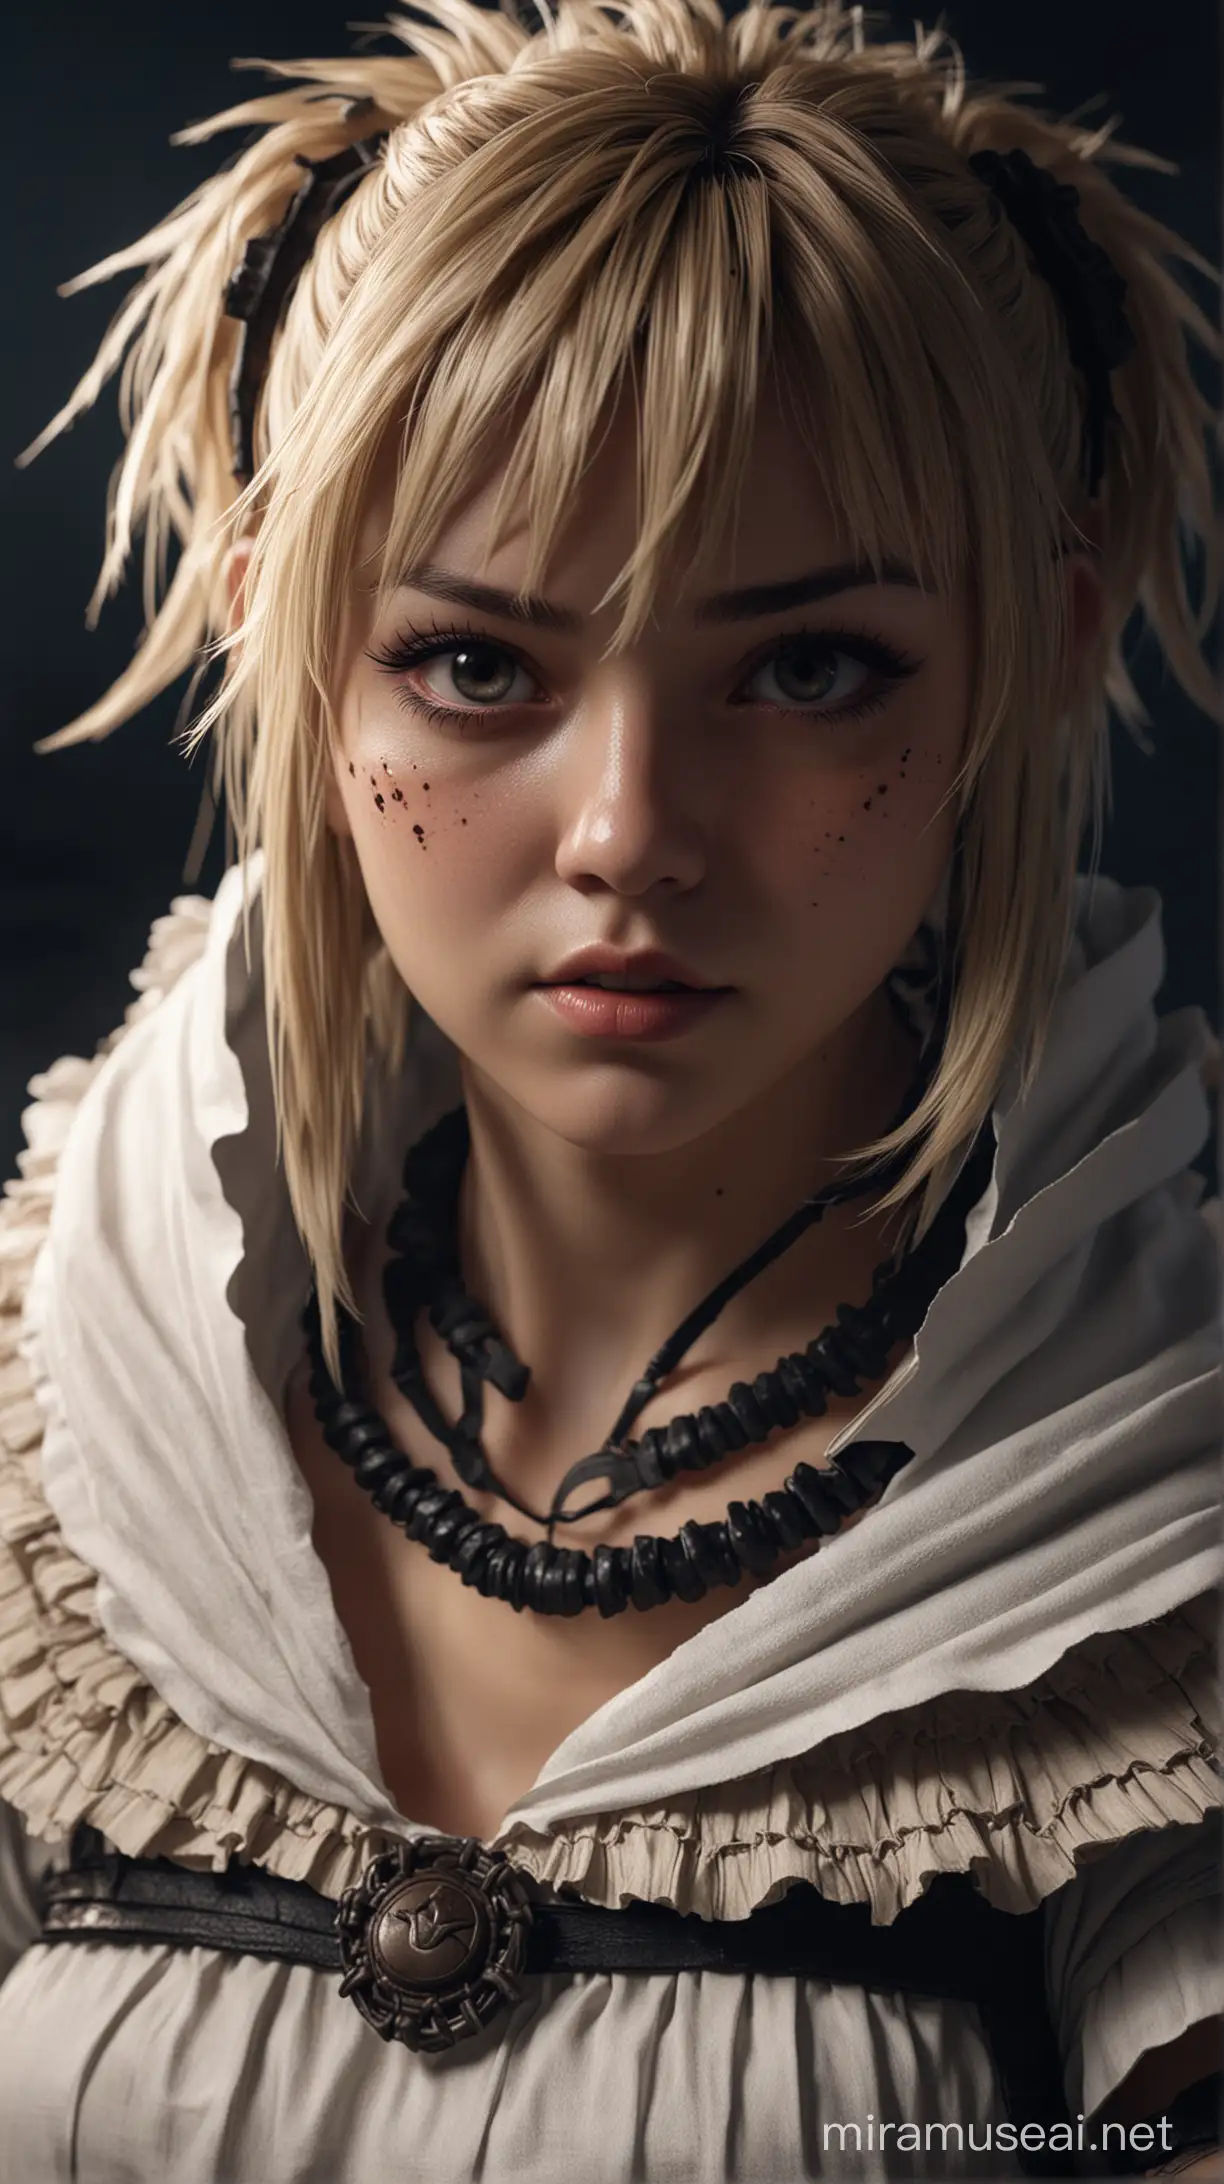 Himiko Toga darkness Electronic, Photo realistic, cinematic, HDR.